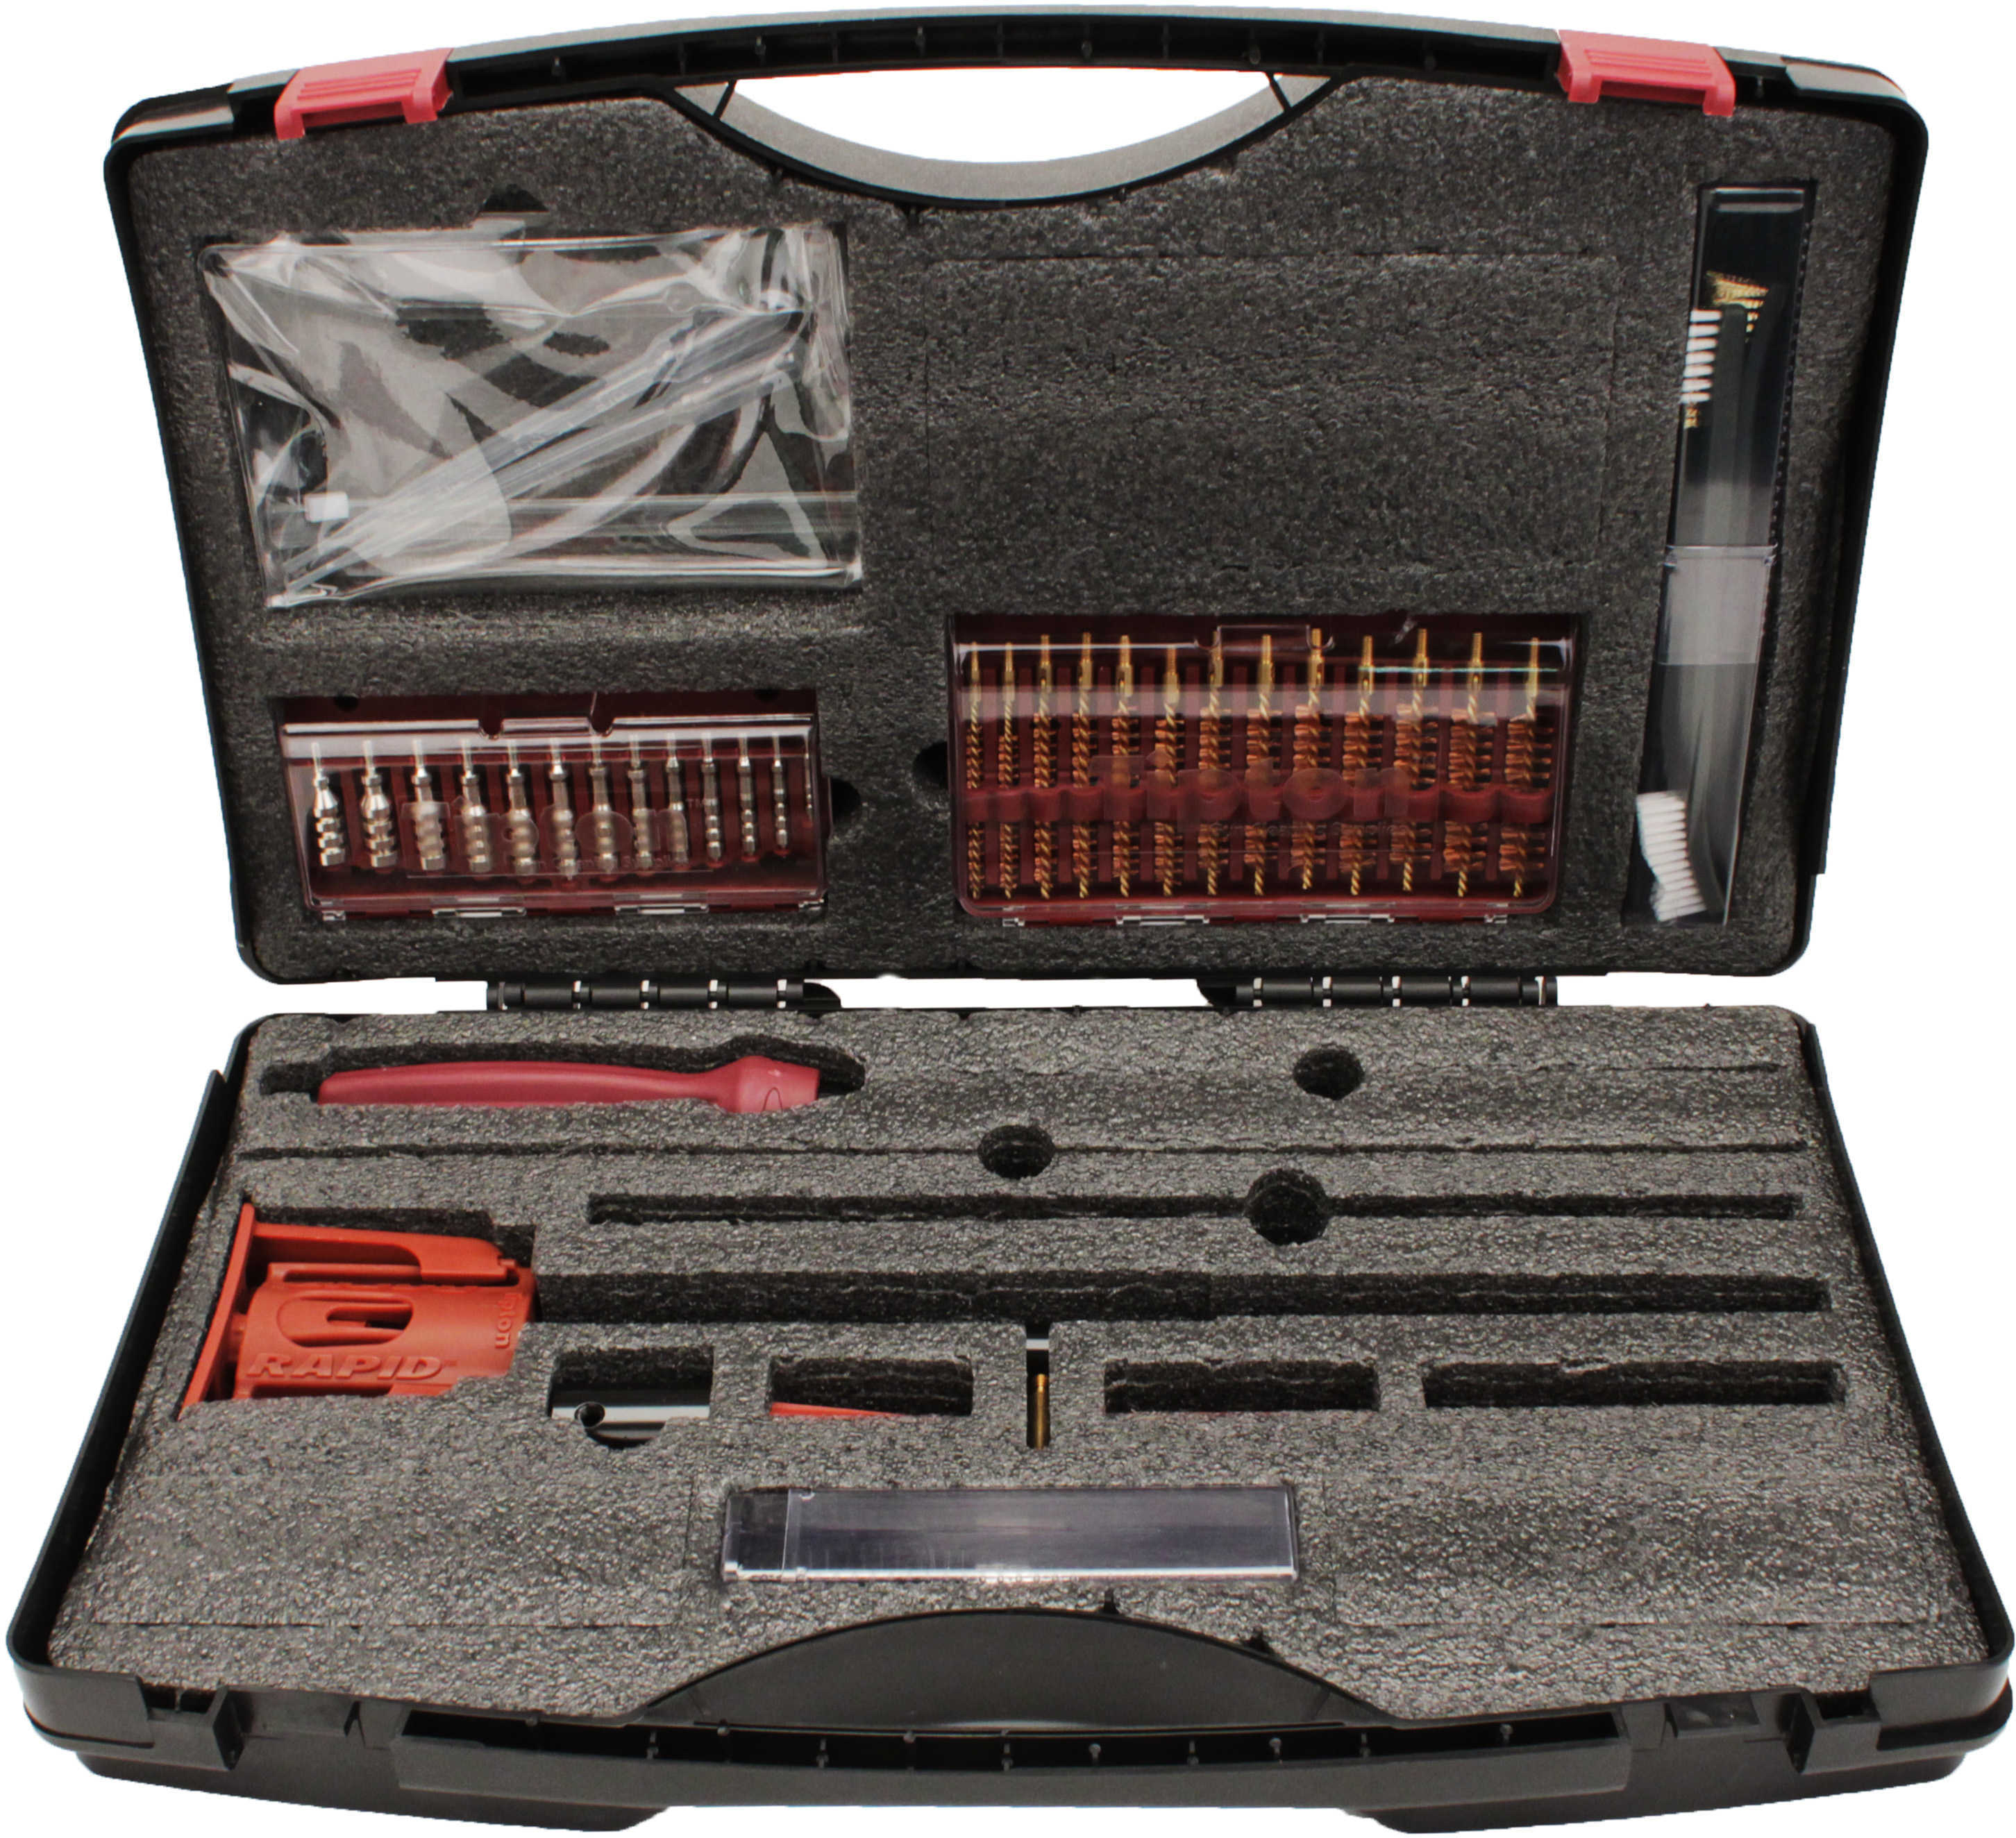 Tipton Ultra Cleaning Kit Md: 554400